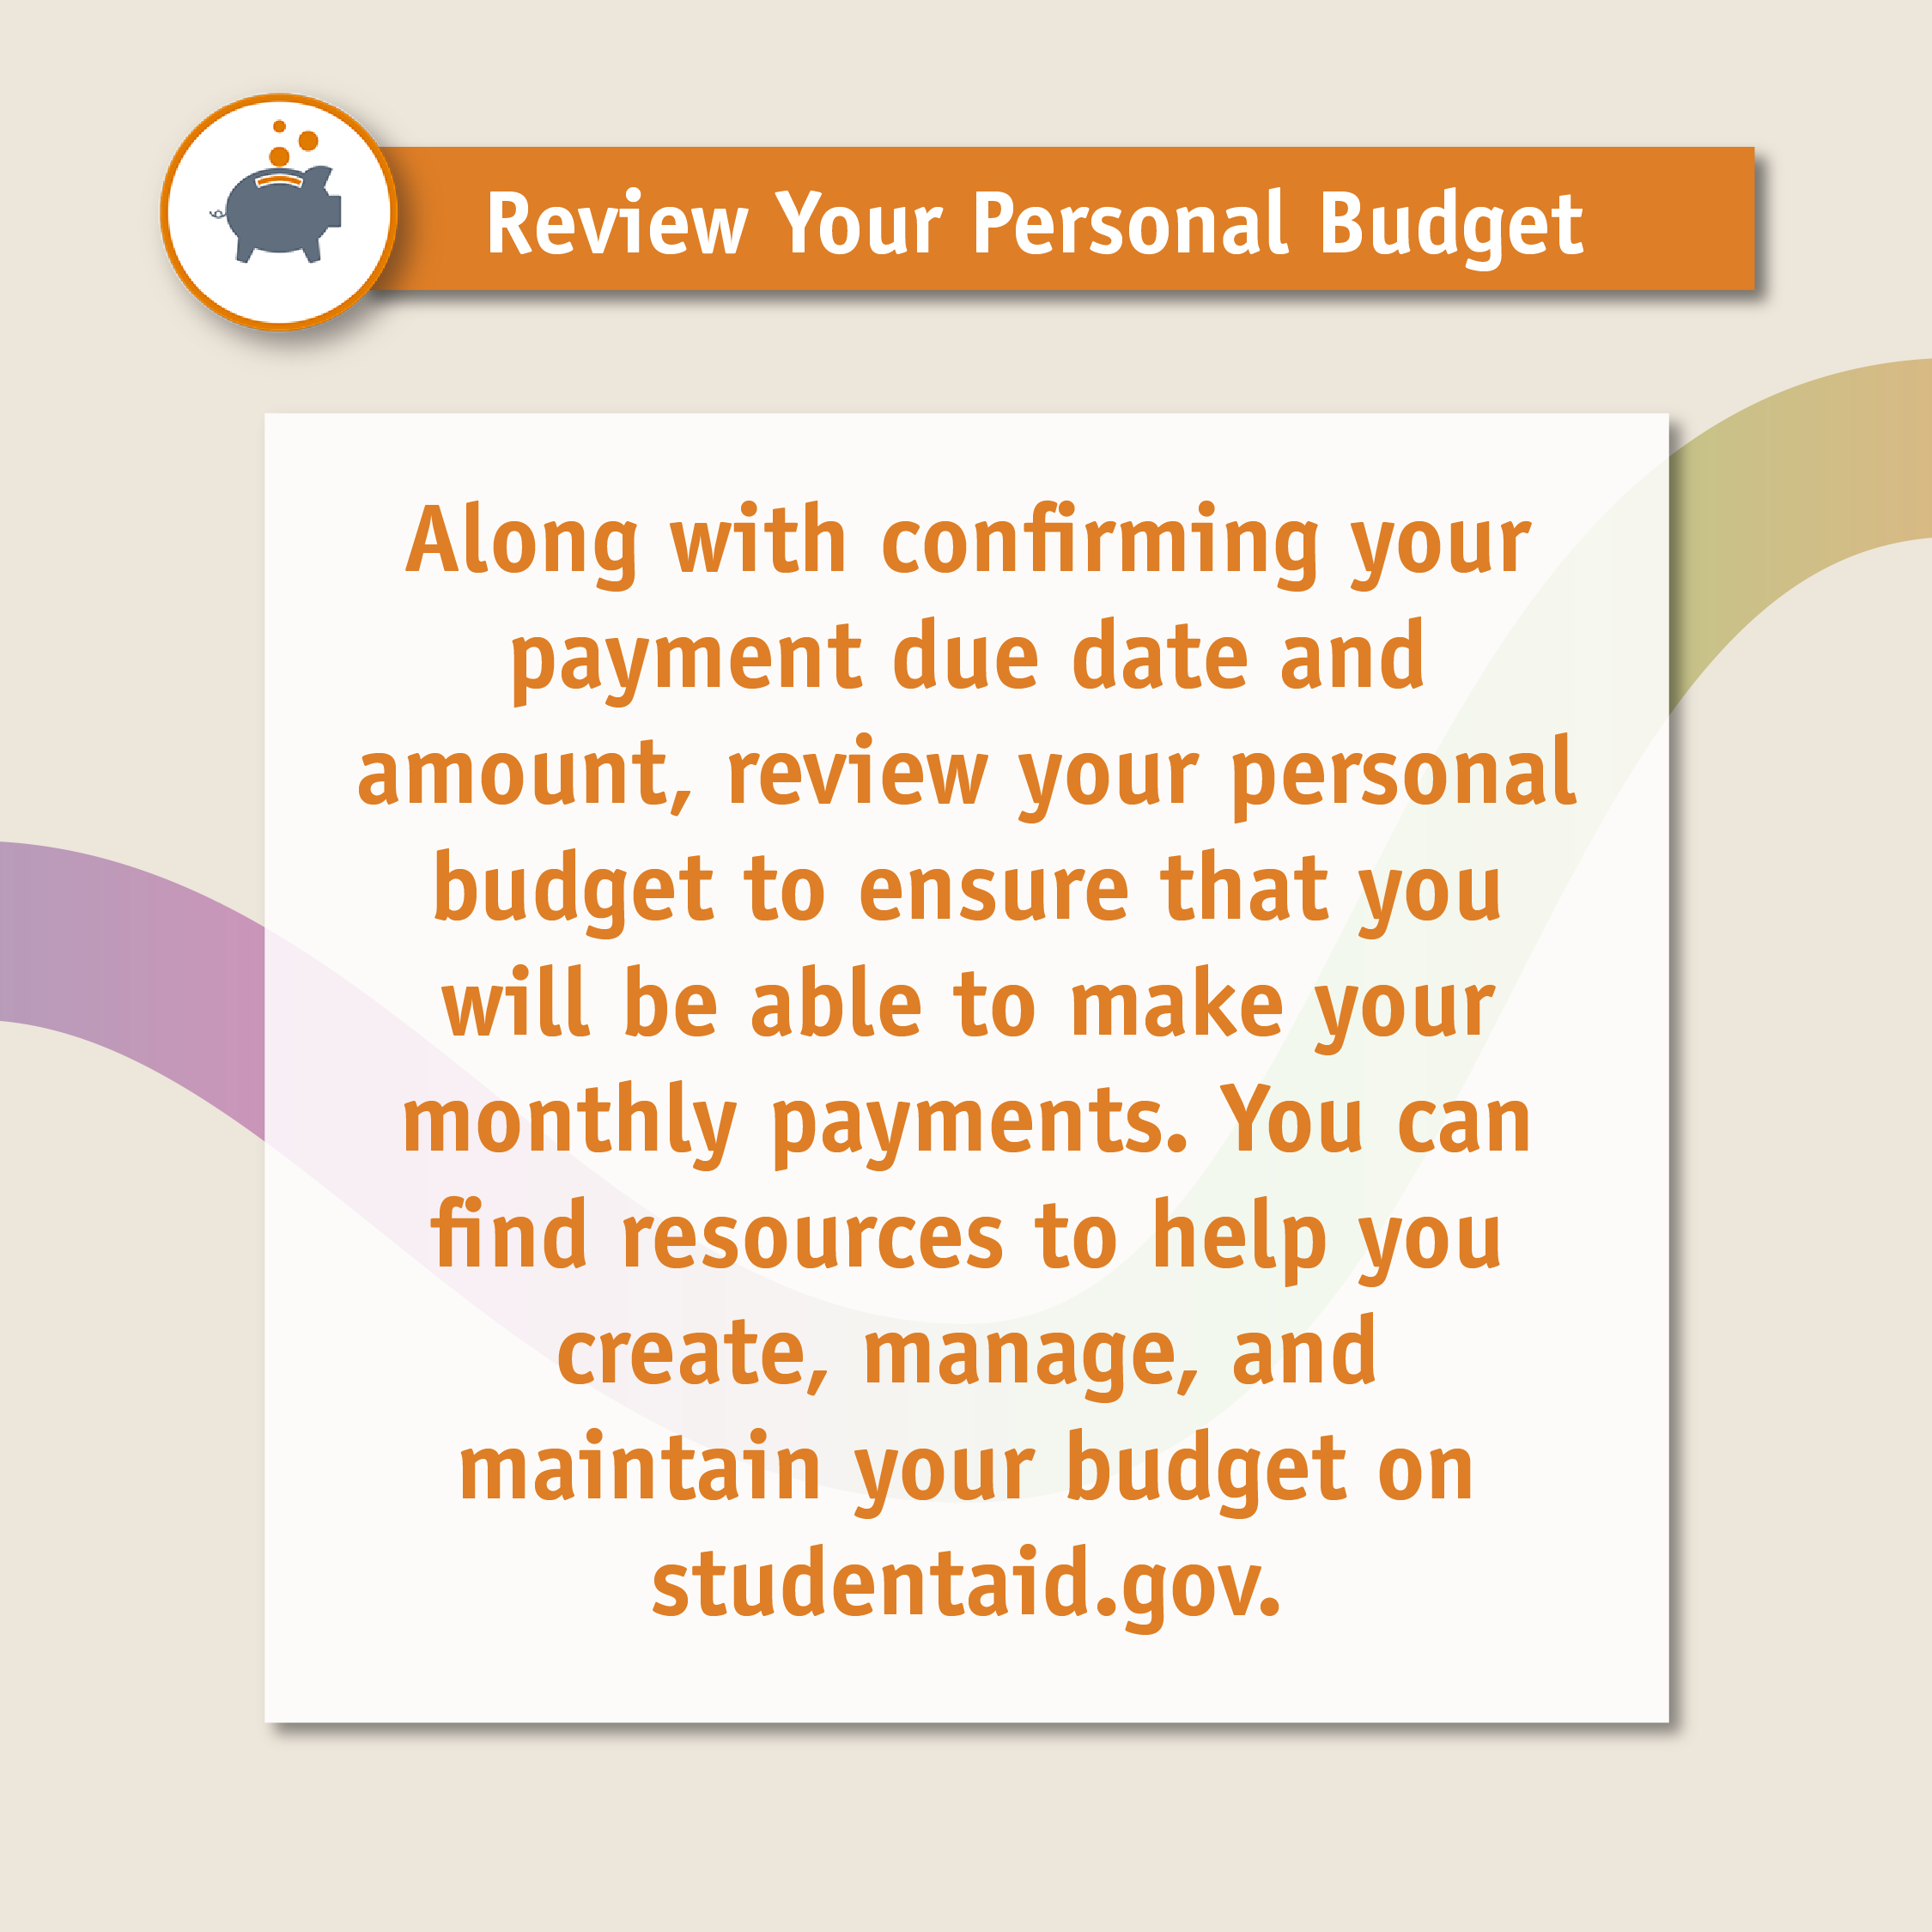 Review Your Personal Budget infographic